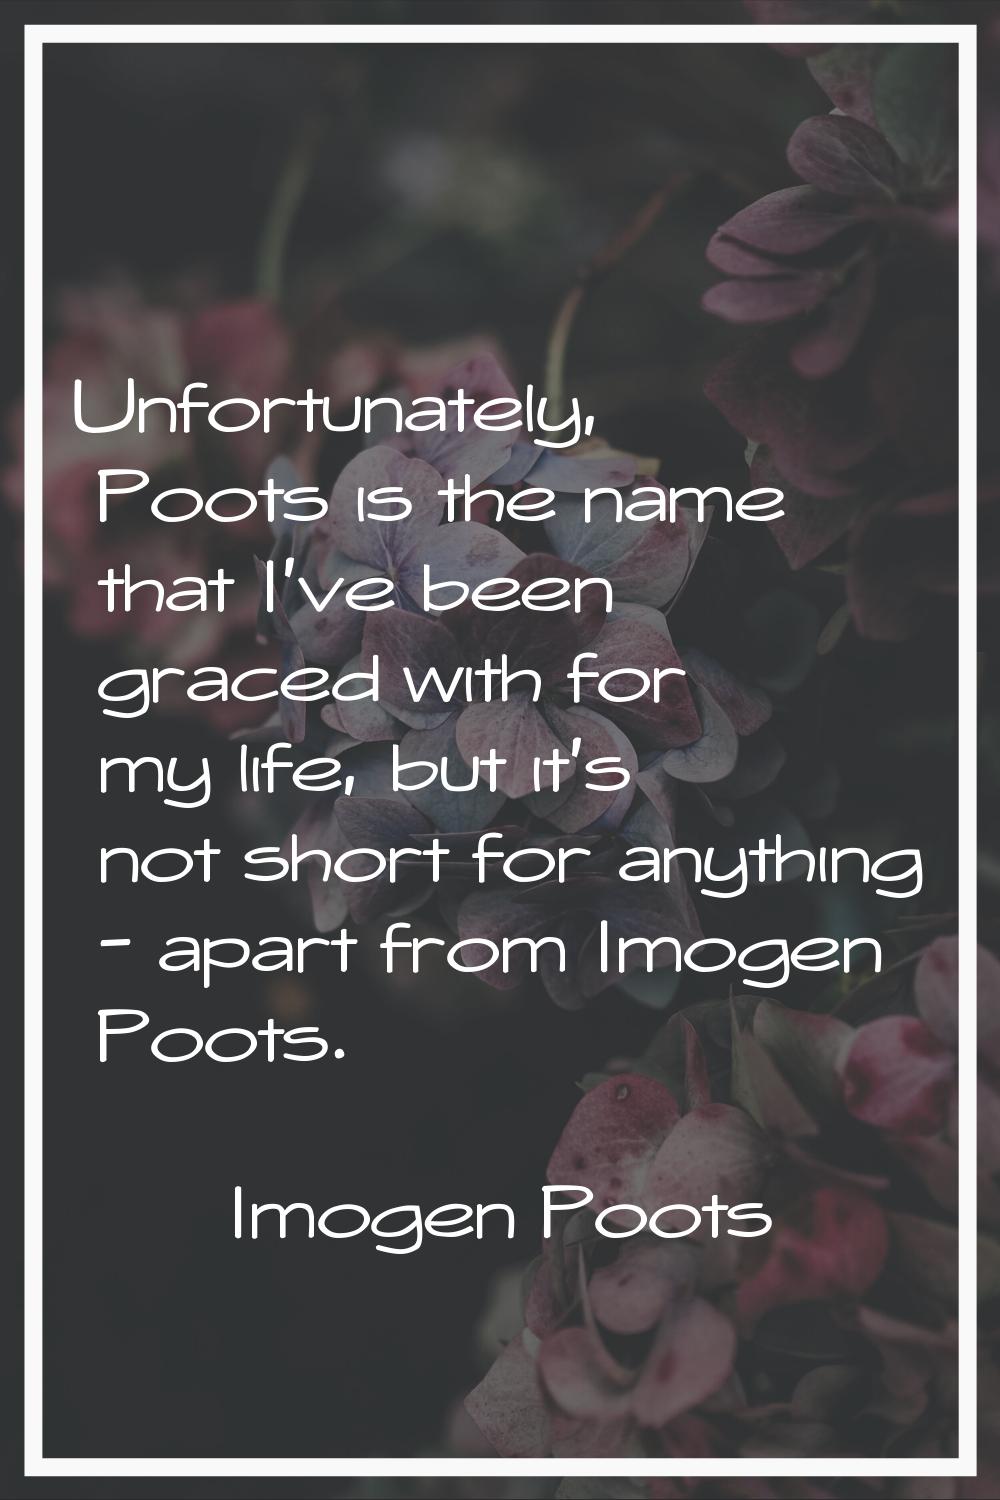 Unfortunately, Poots is the name that I've been graced with for my life, but it's not short for any